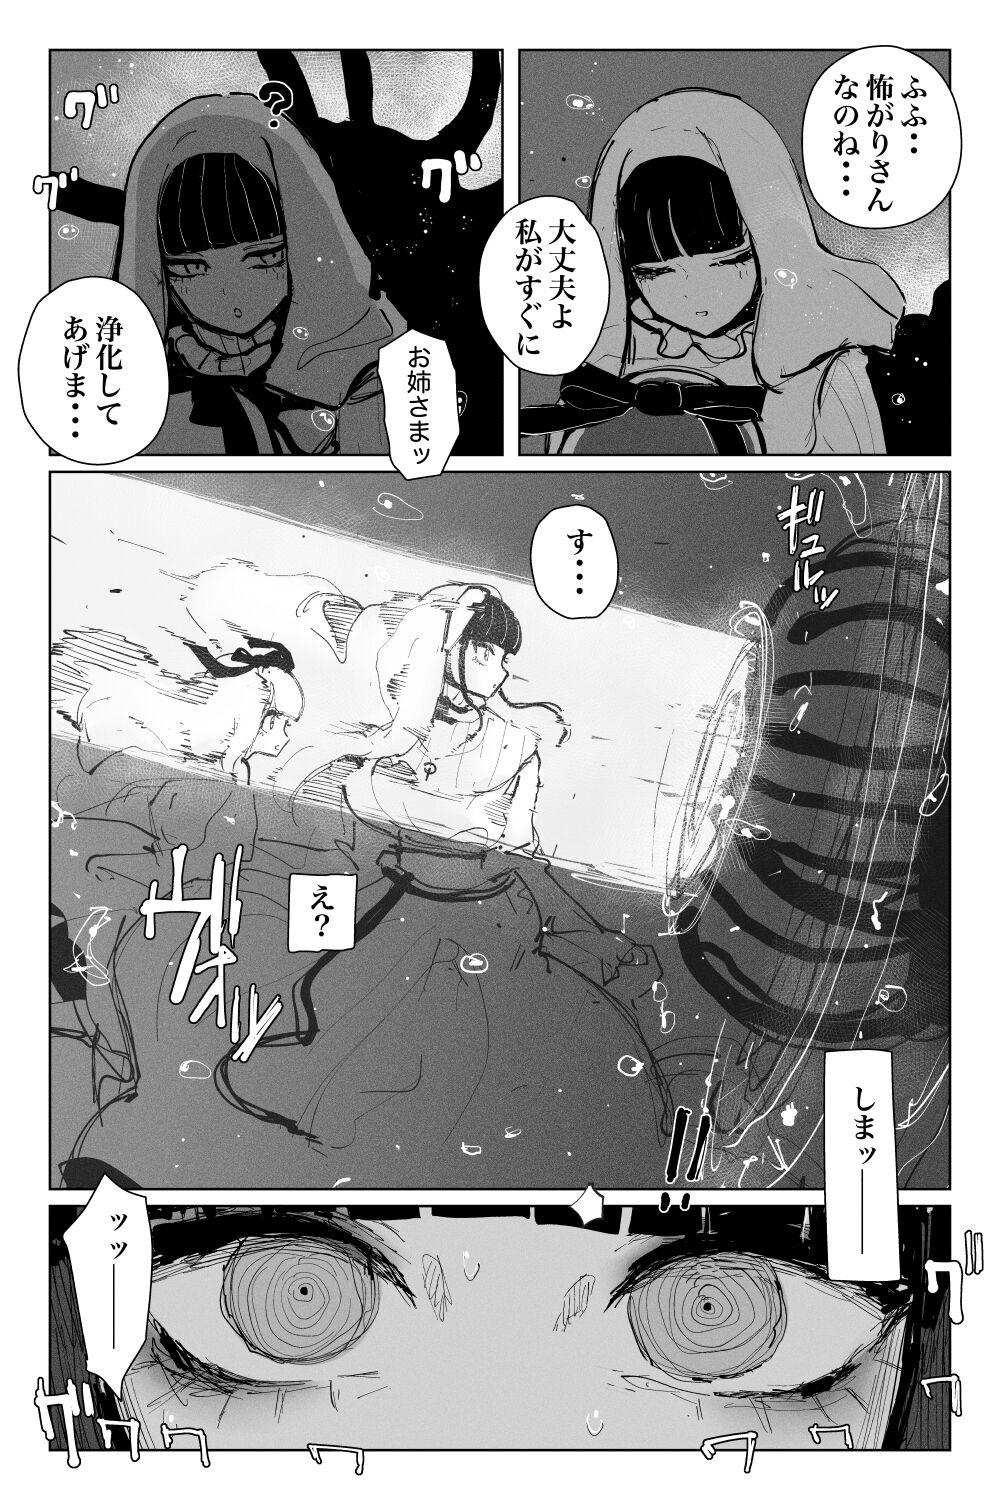 Coroa #03MarineMirage + Bad end... - Original Married - Page 7